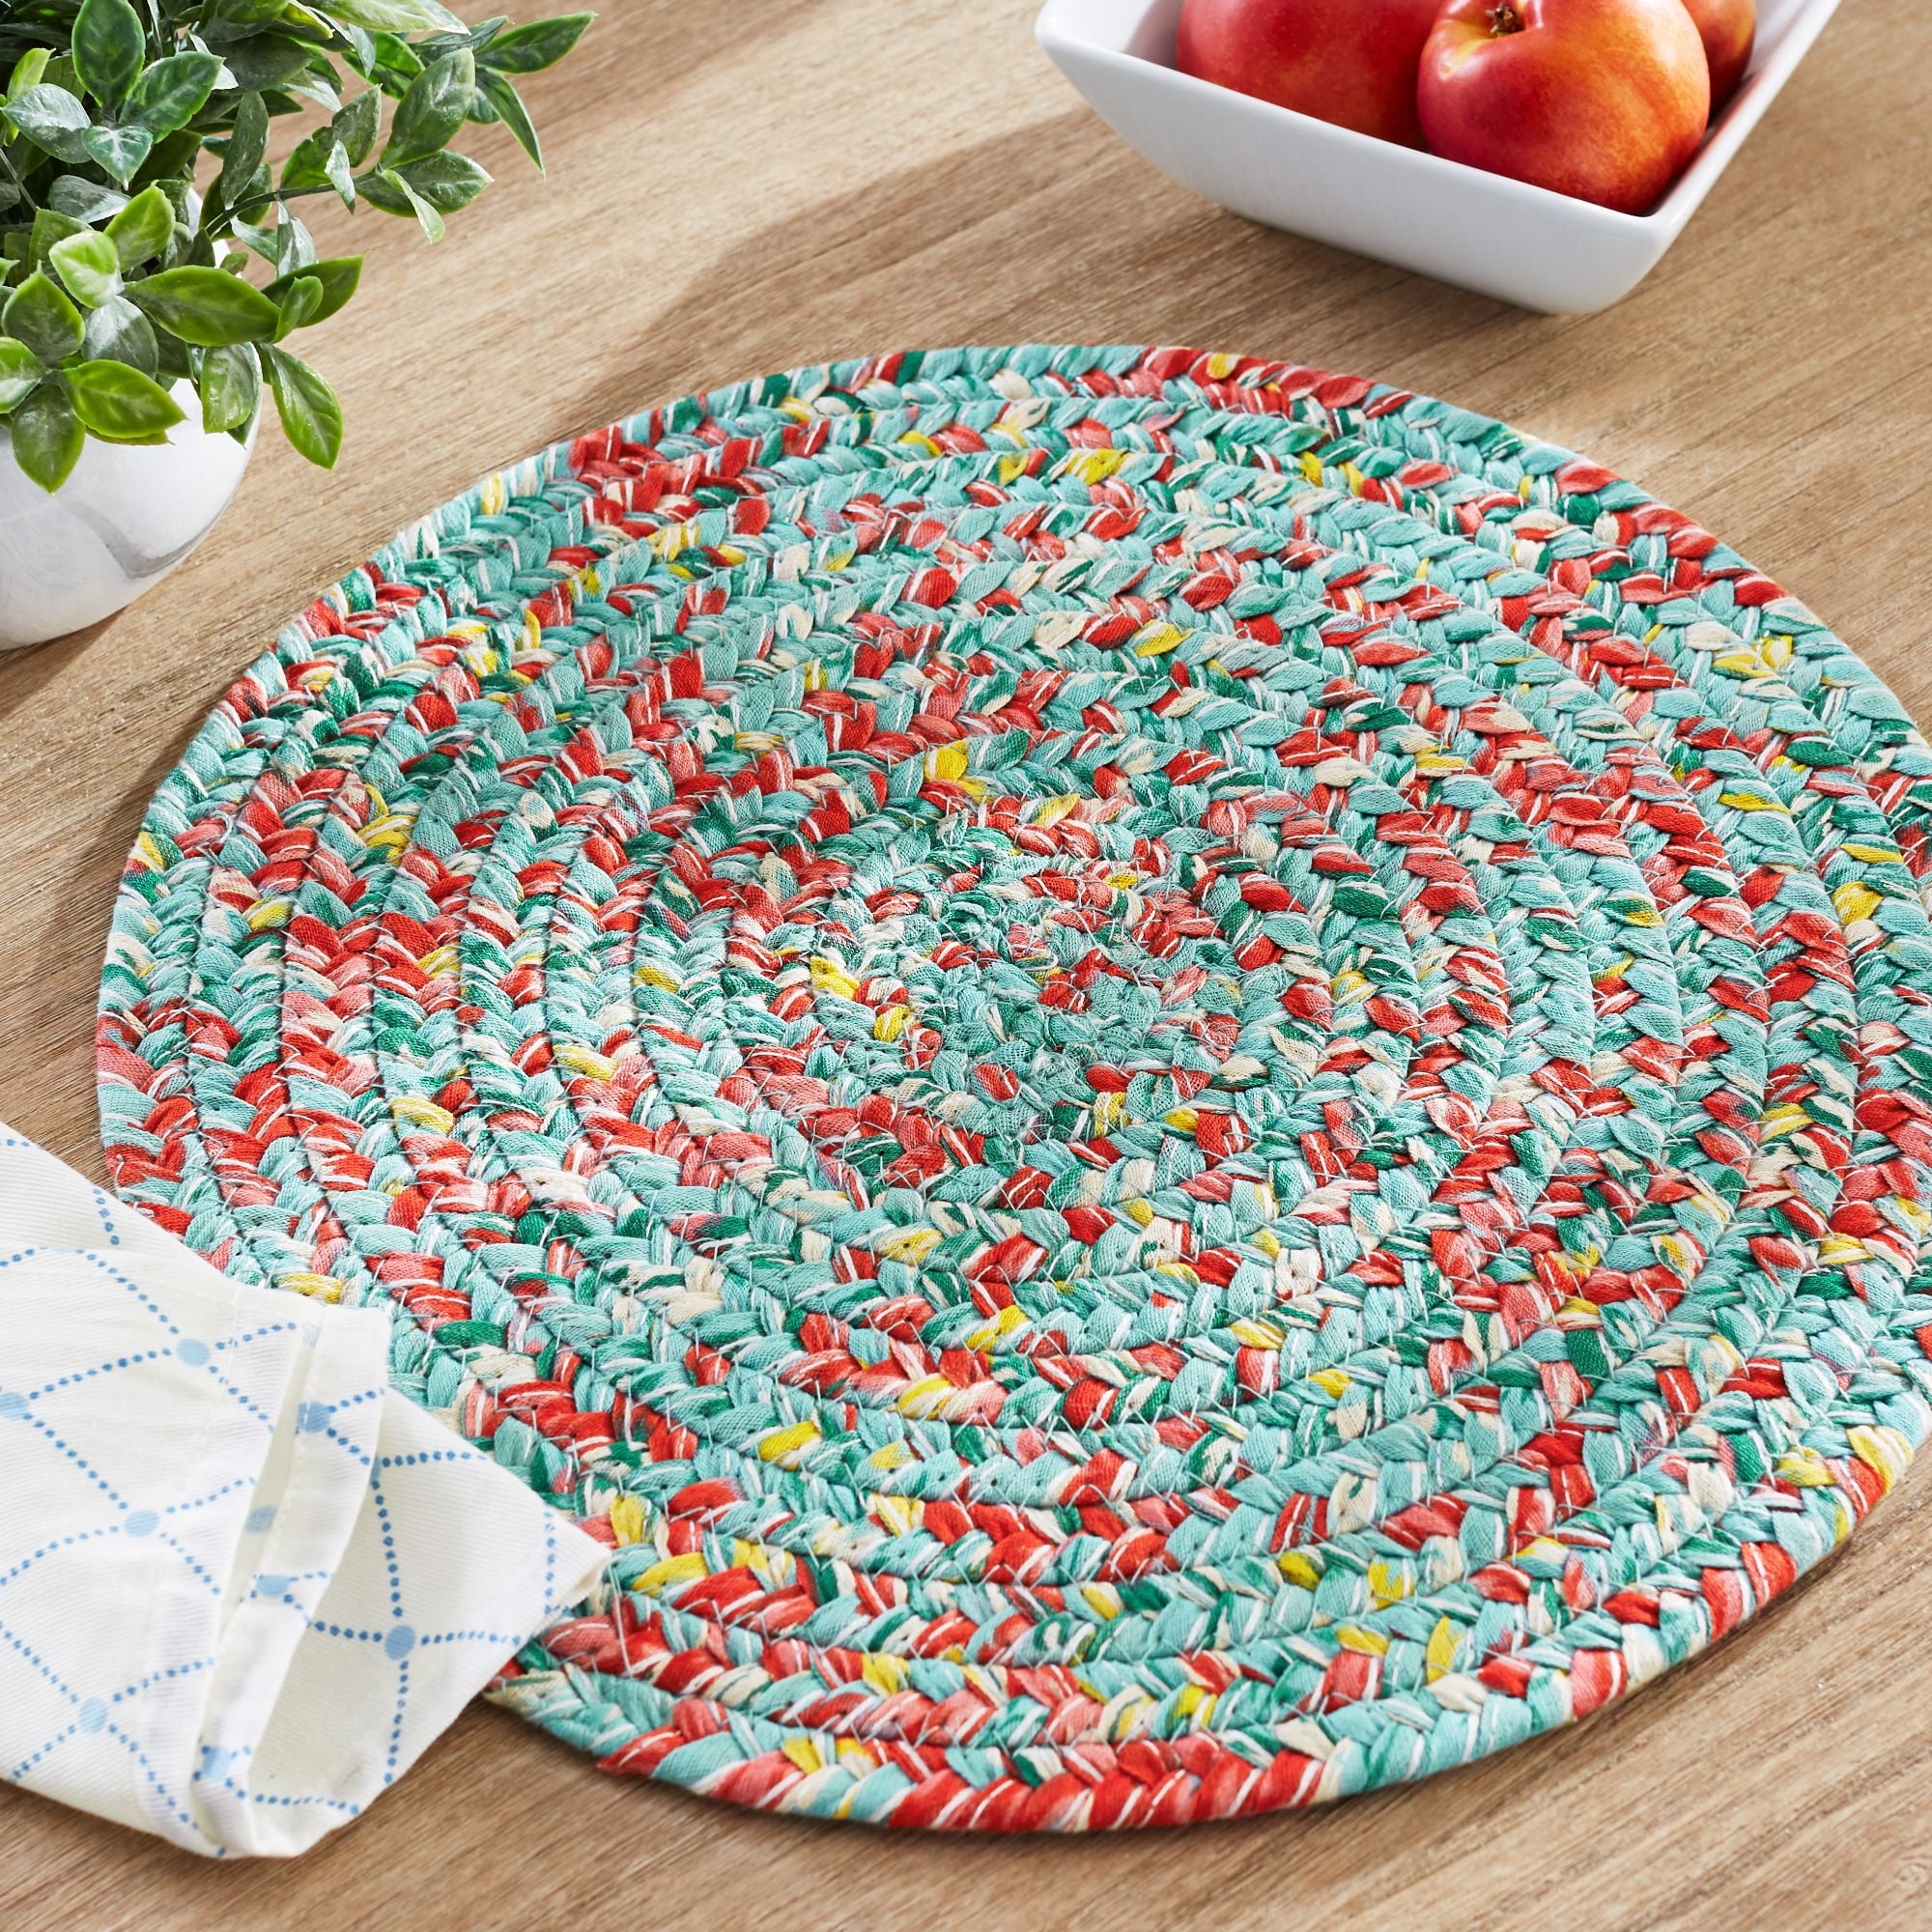 The Pioneer Woman Vintage Floral Braided Single Cotton Placemat Centerpiece 